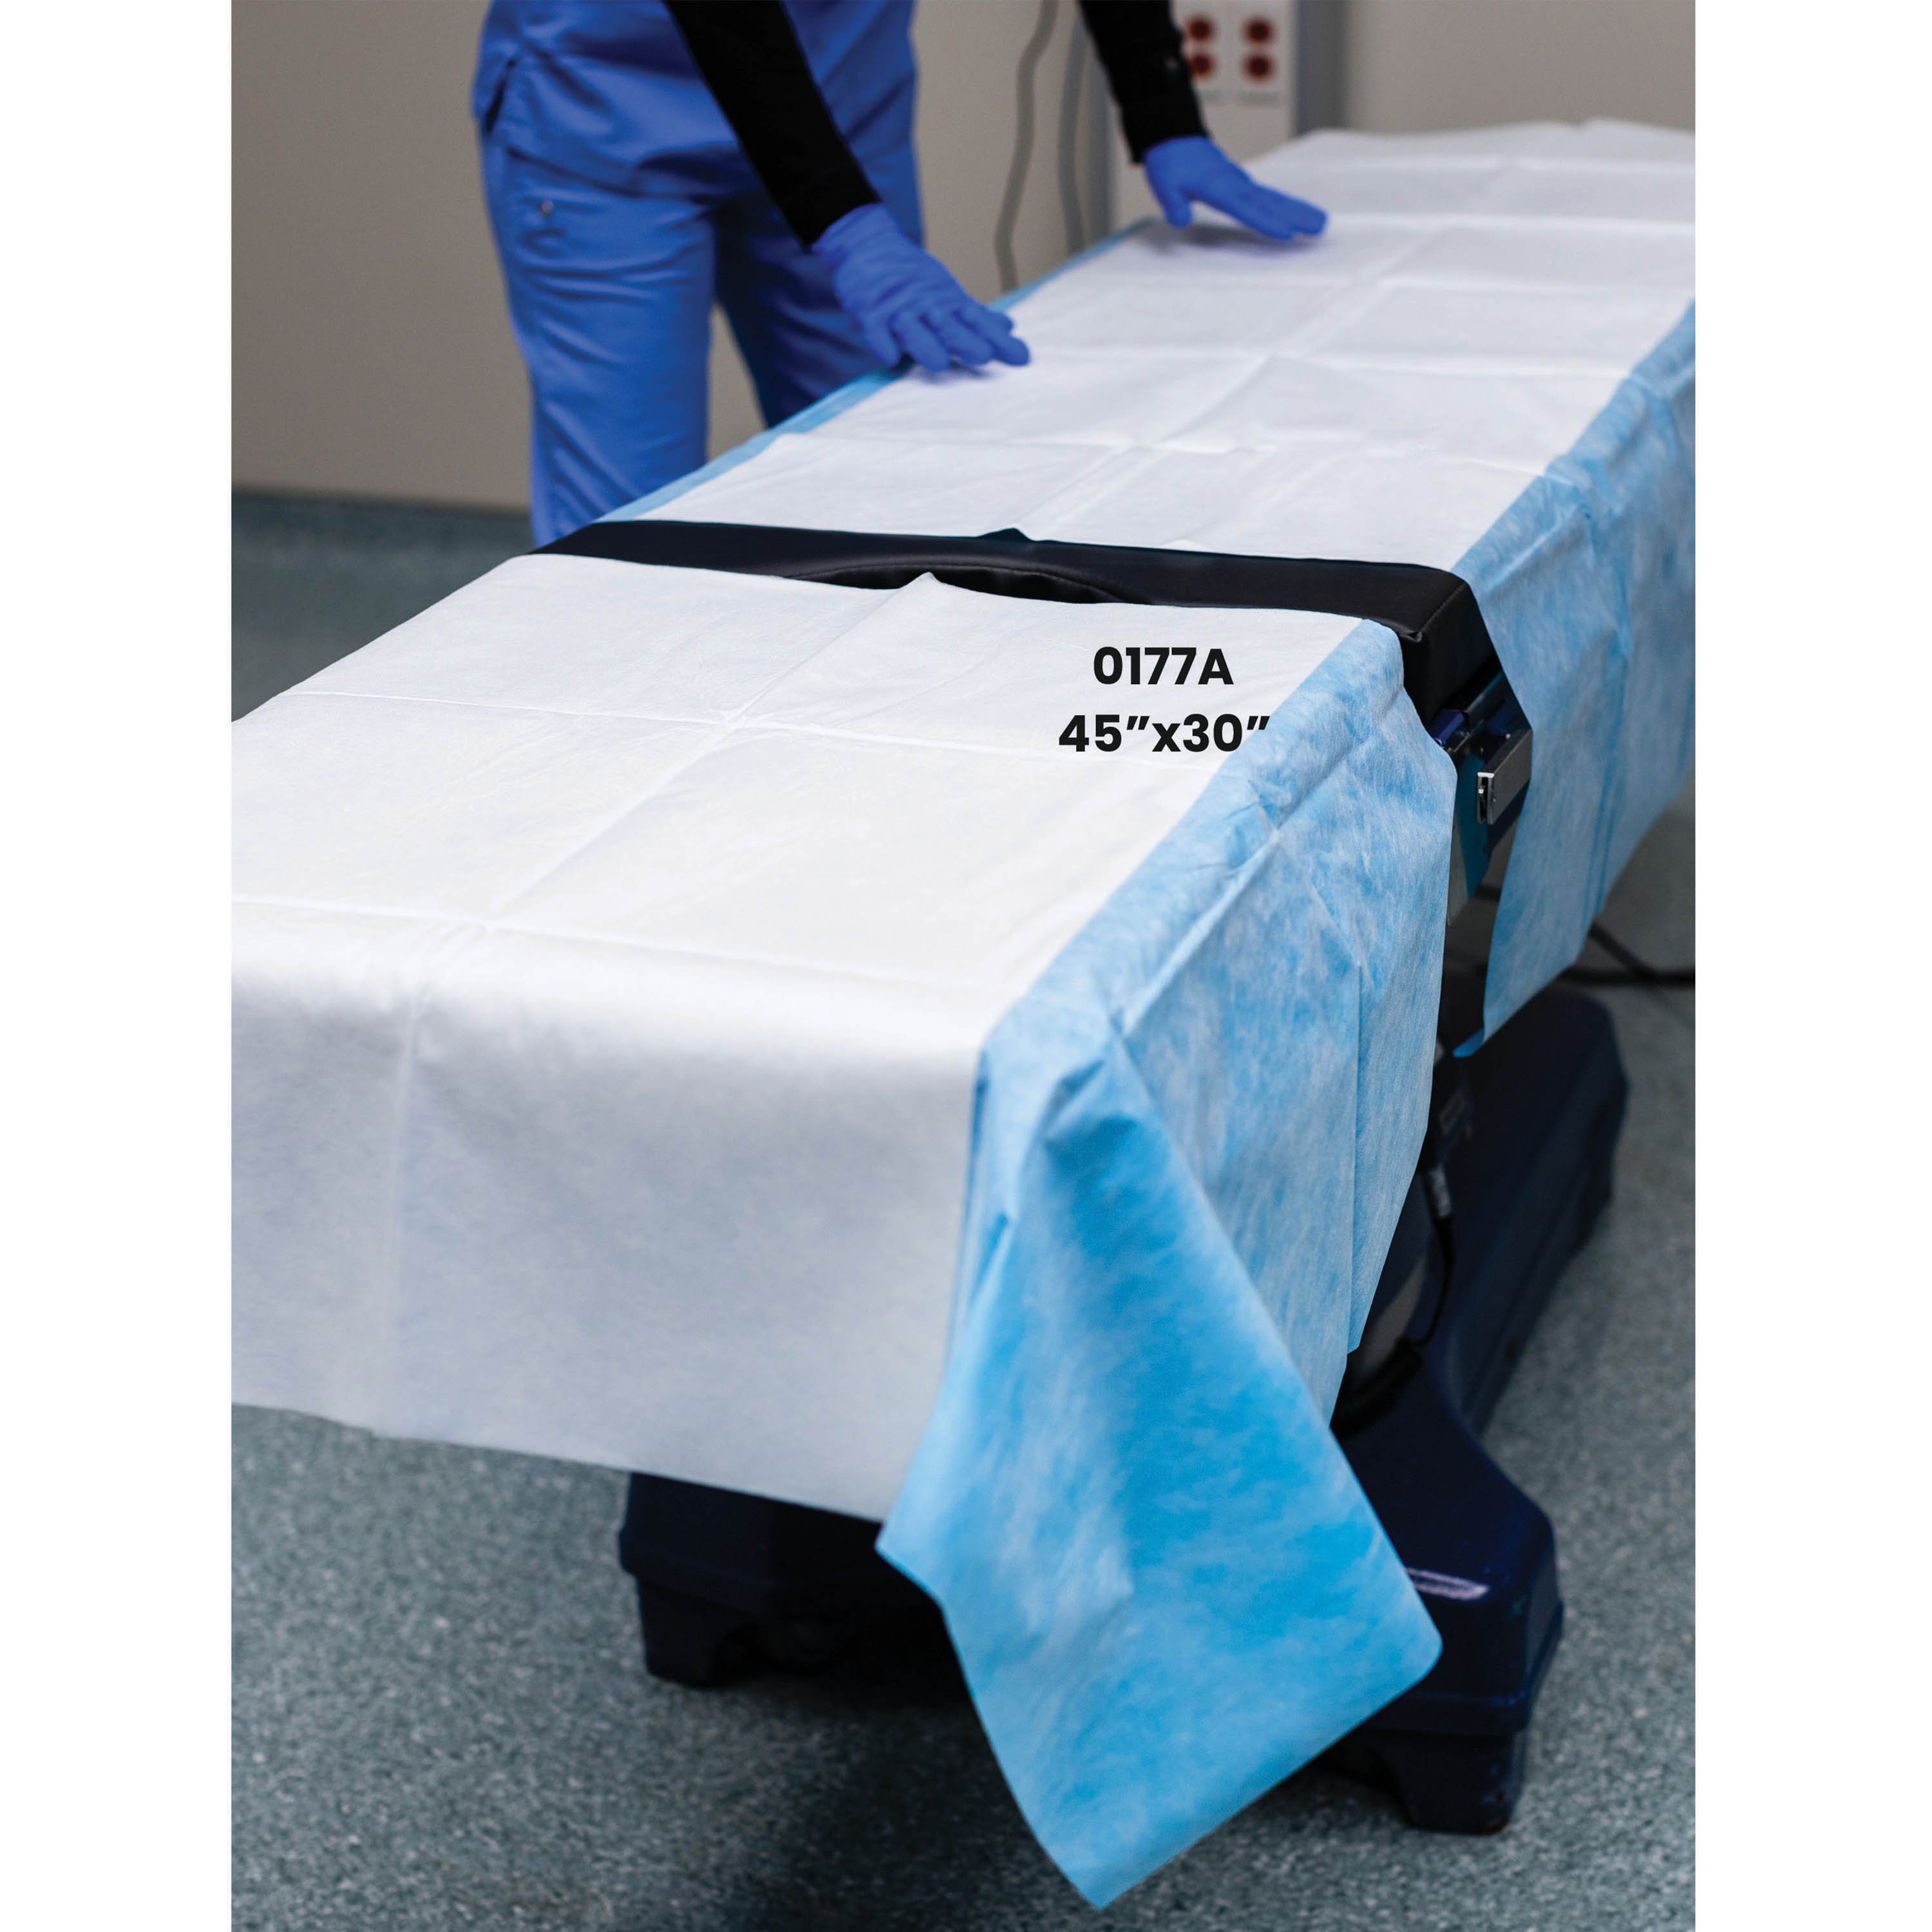 Absorbent Impervious Table Sheet - 45